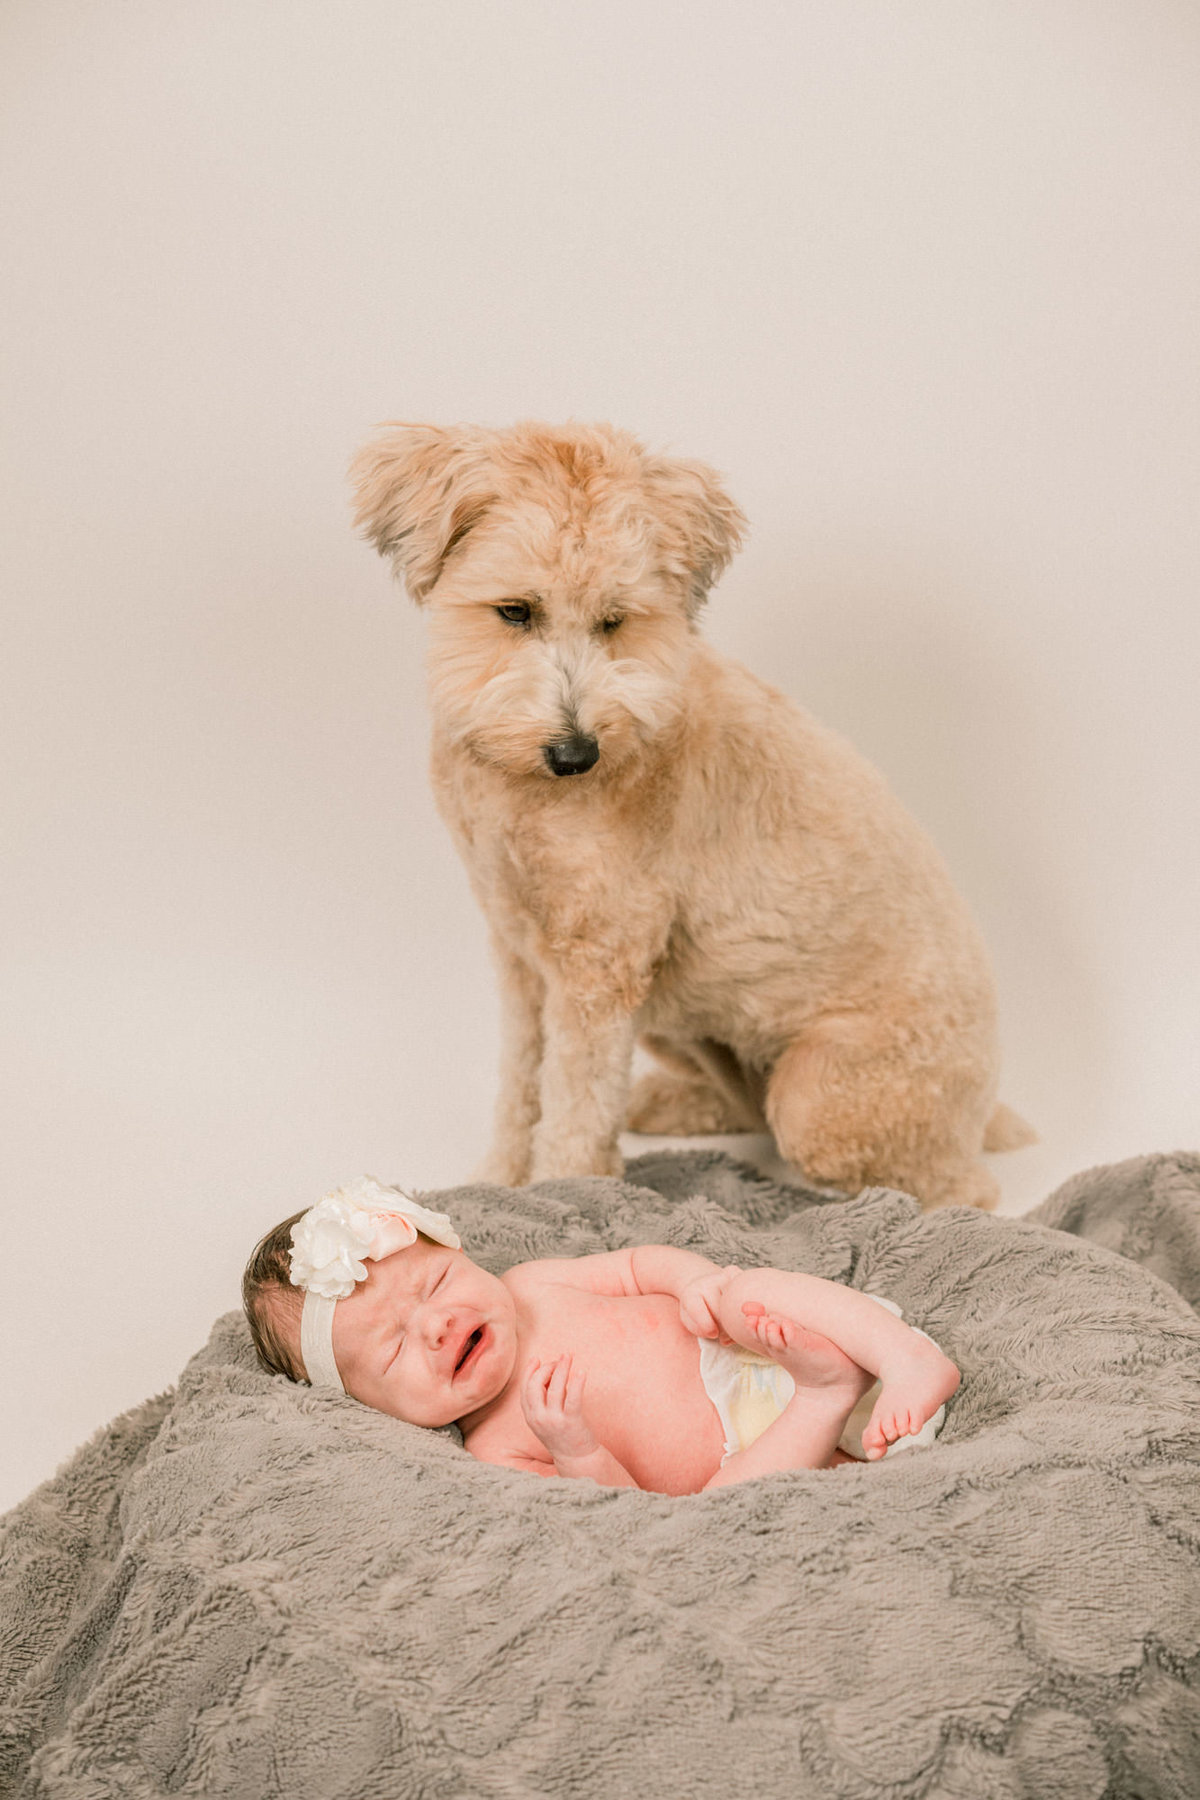 Dog sits next to and watches the newborn little girl as she lies on a pillow and cries